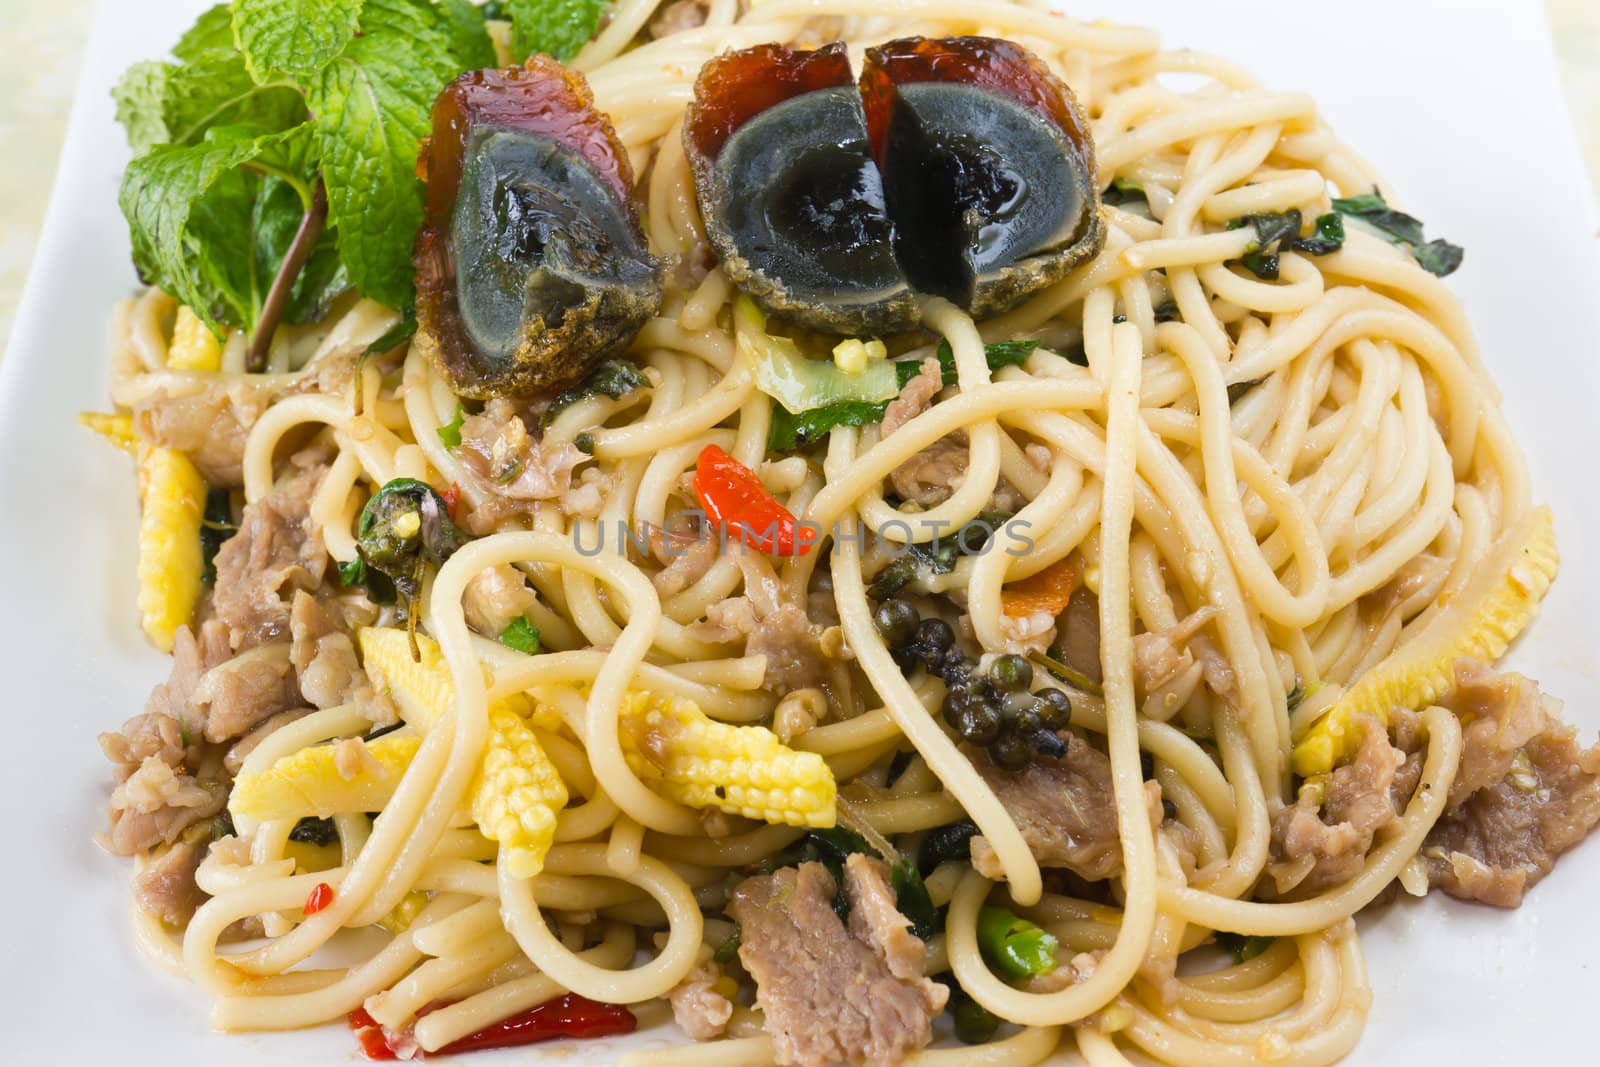 Image of Thai spicy food noodle